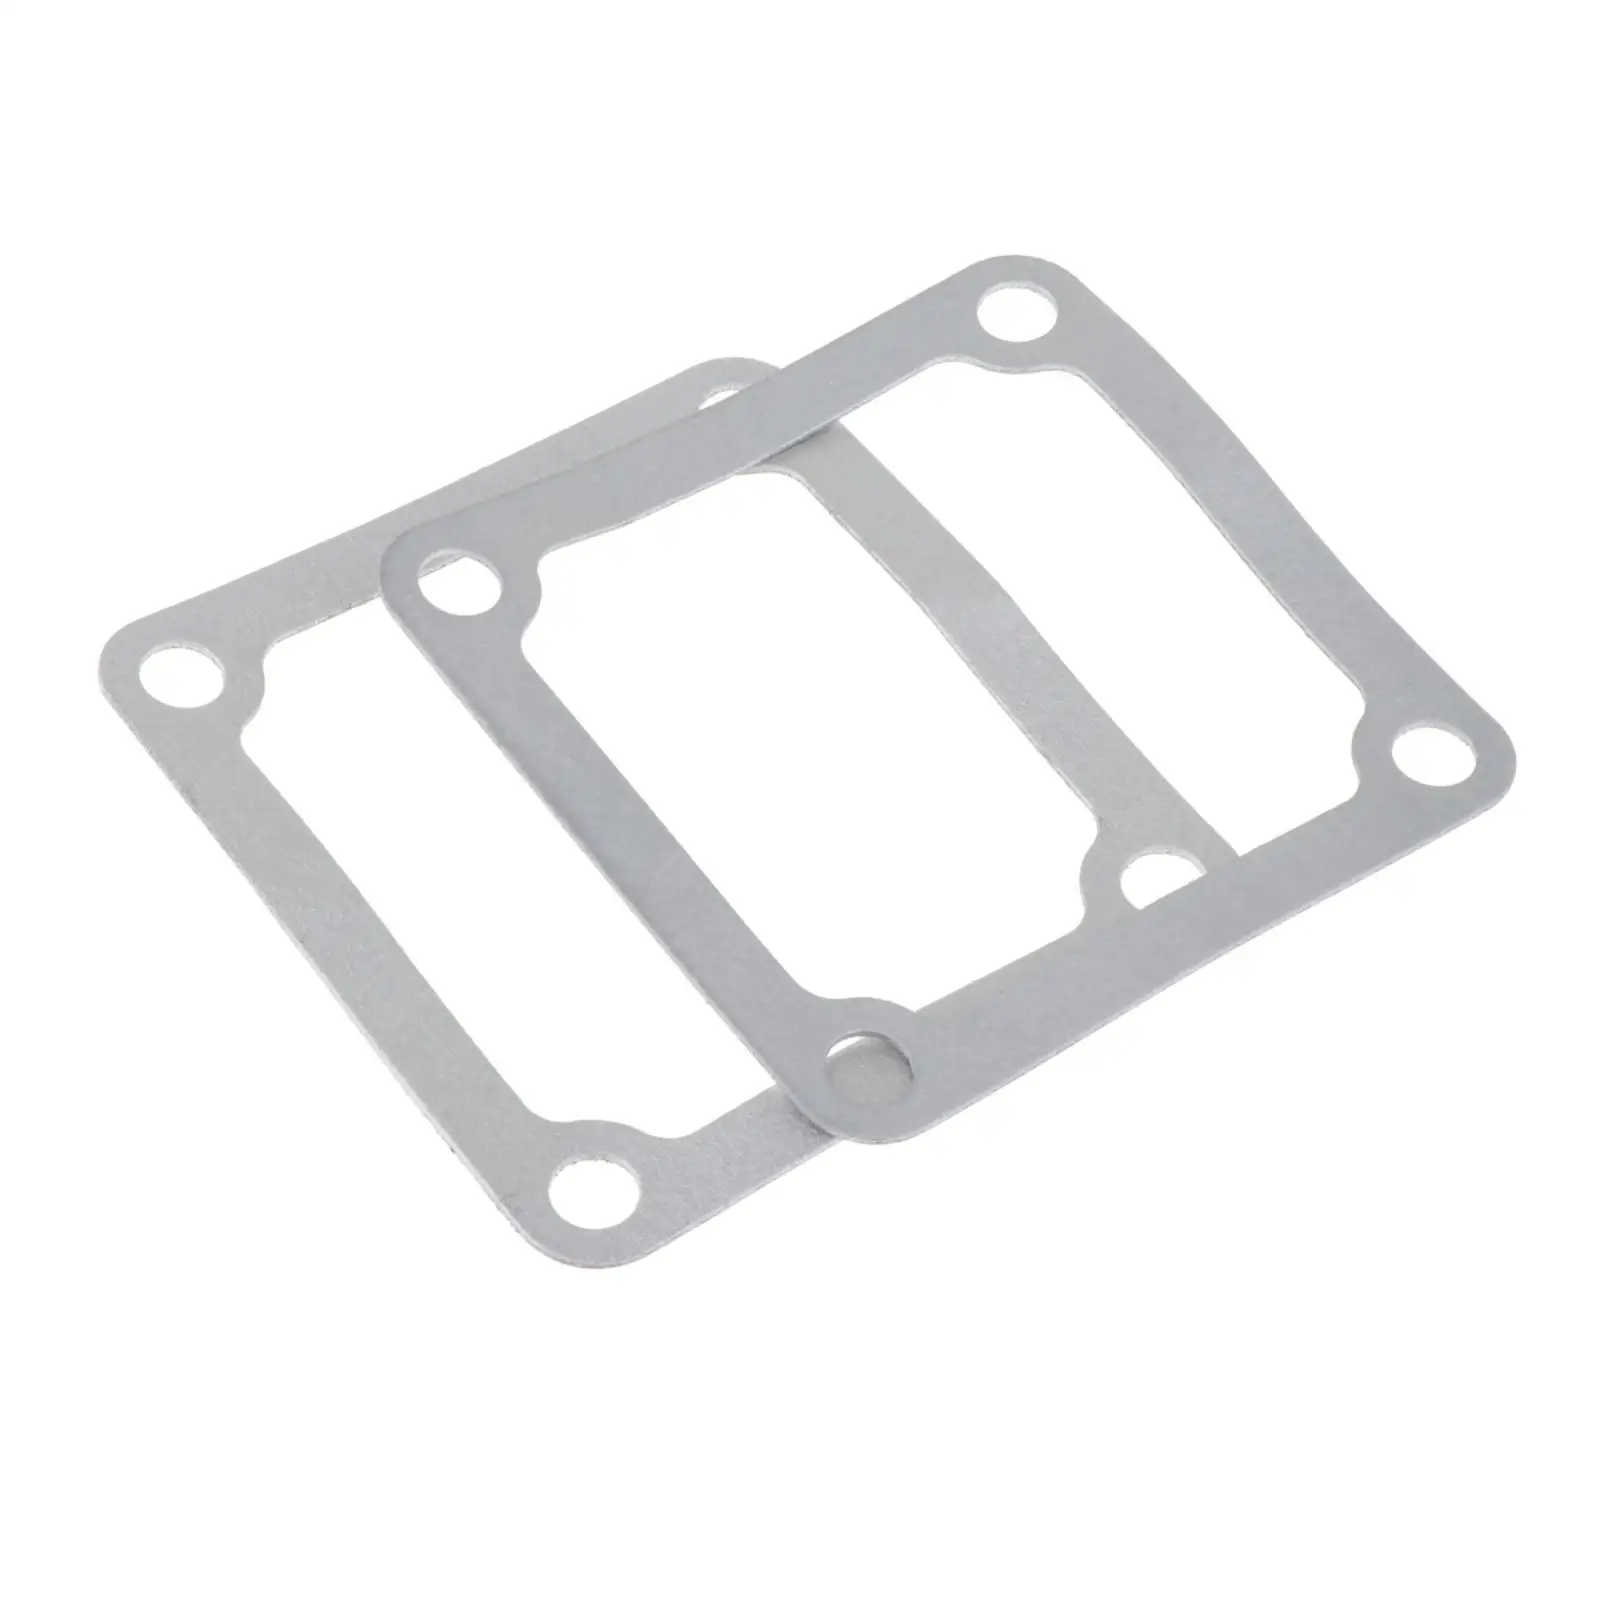 2 Pieces Intake Heater Grid Gaskets Durable Portable Professional Vehicle Power Directly Replaces Spare Replacement Auto Parts